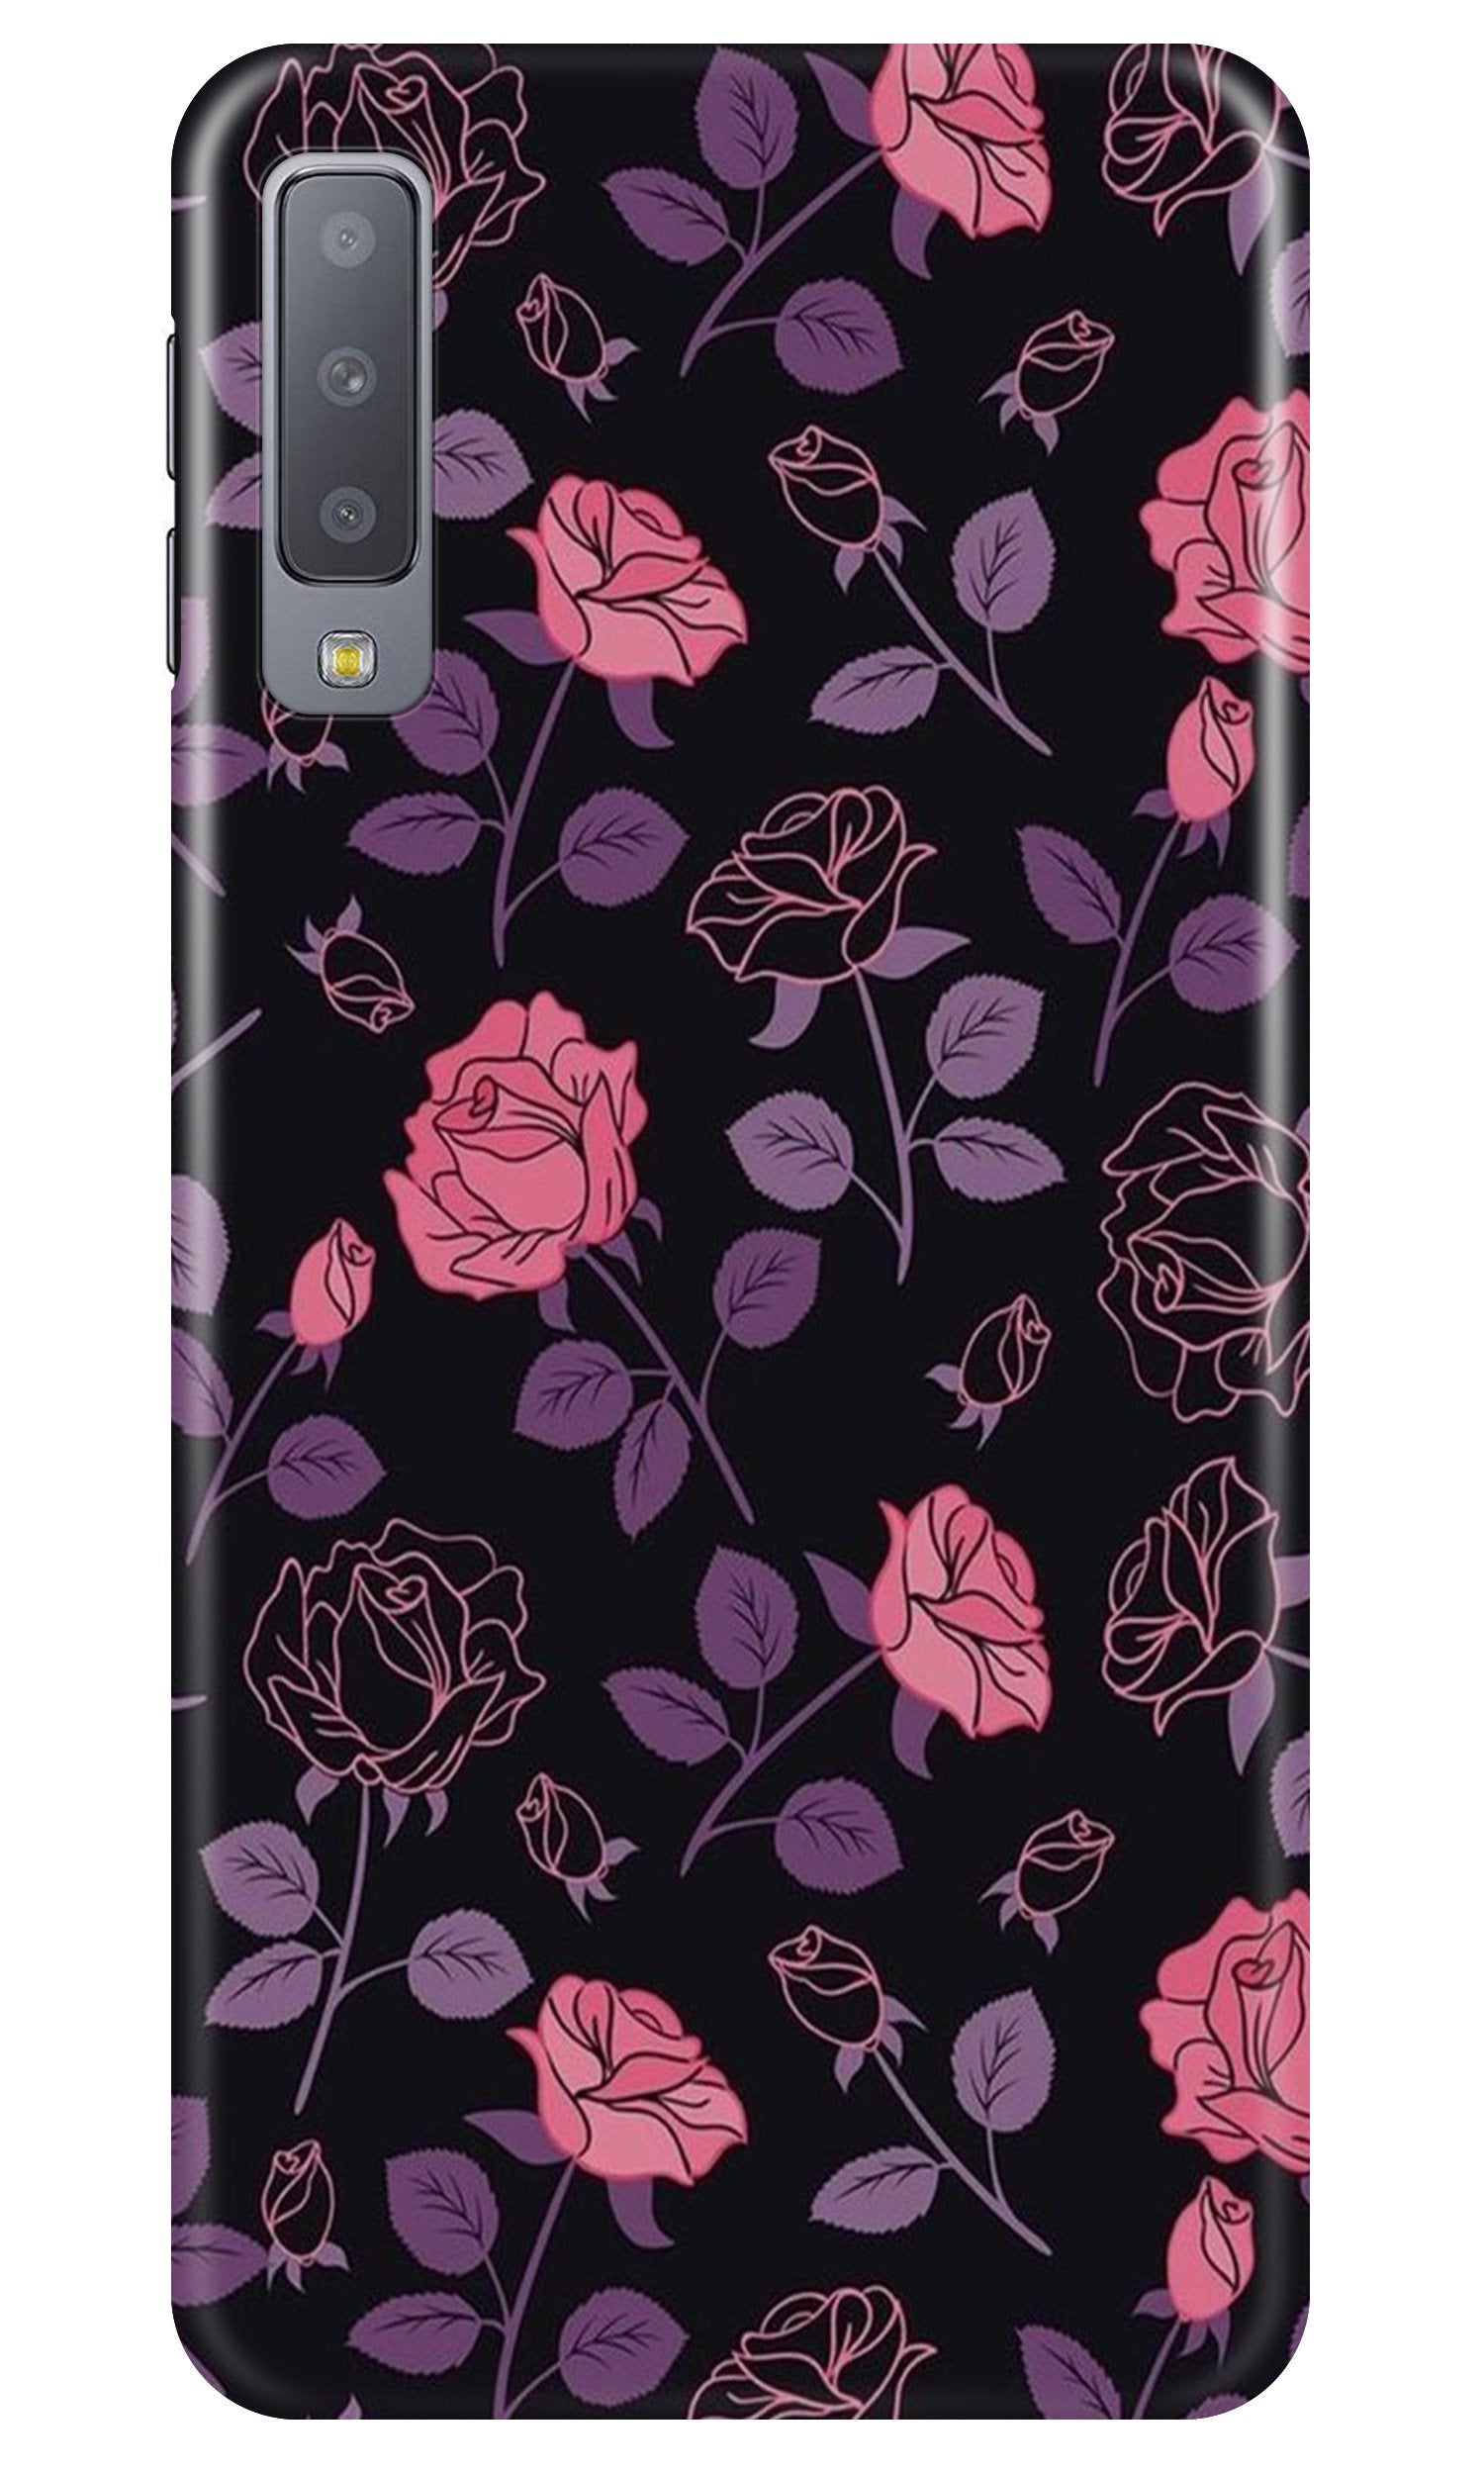 Rose Pattern Case for Galaxy A7 (2018)